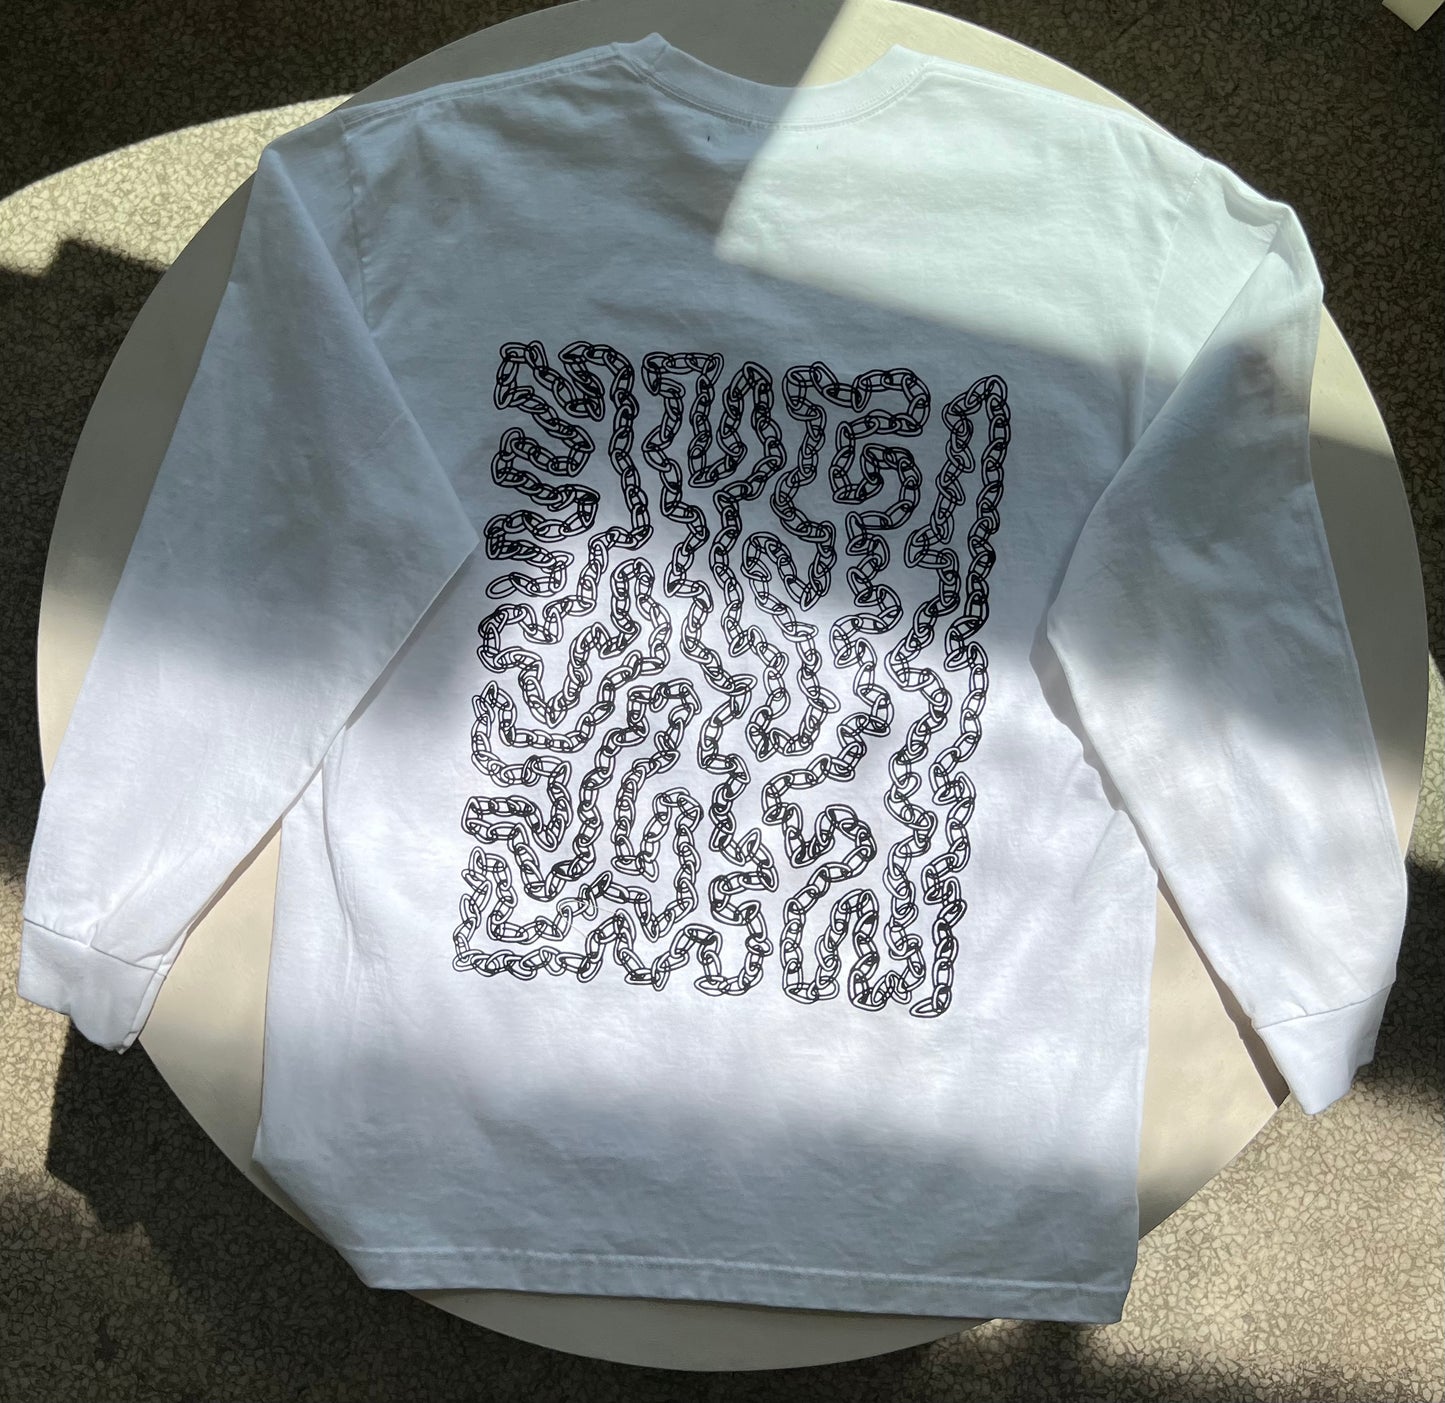 back of shirt - black and white graphic print of chain link curves filling the majority of the back of the shirt